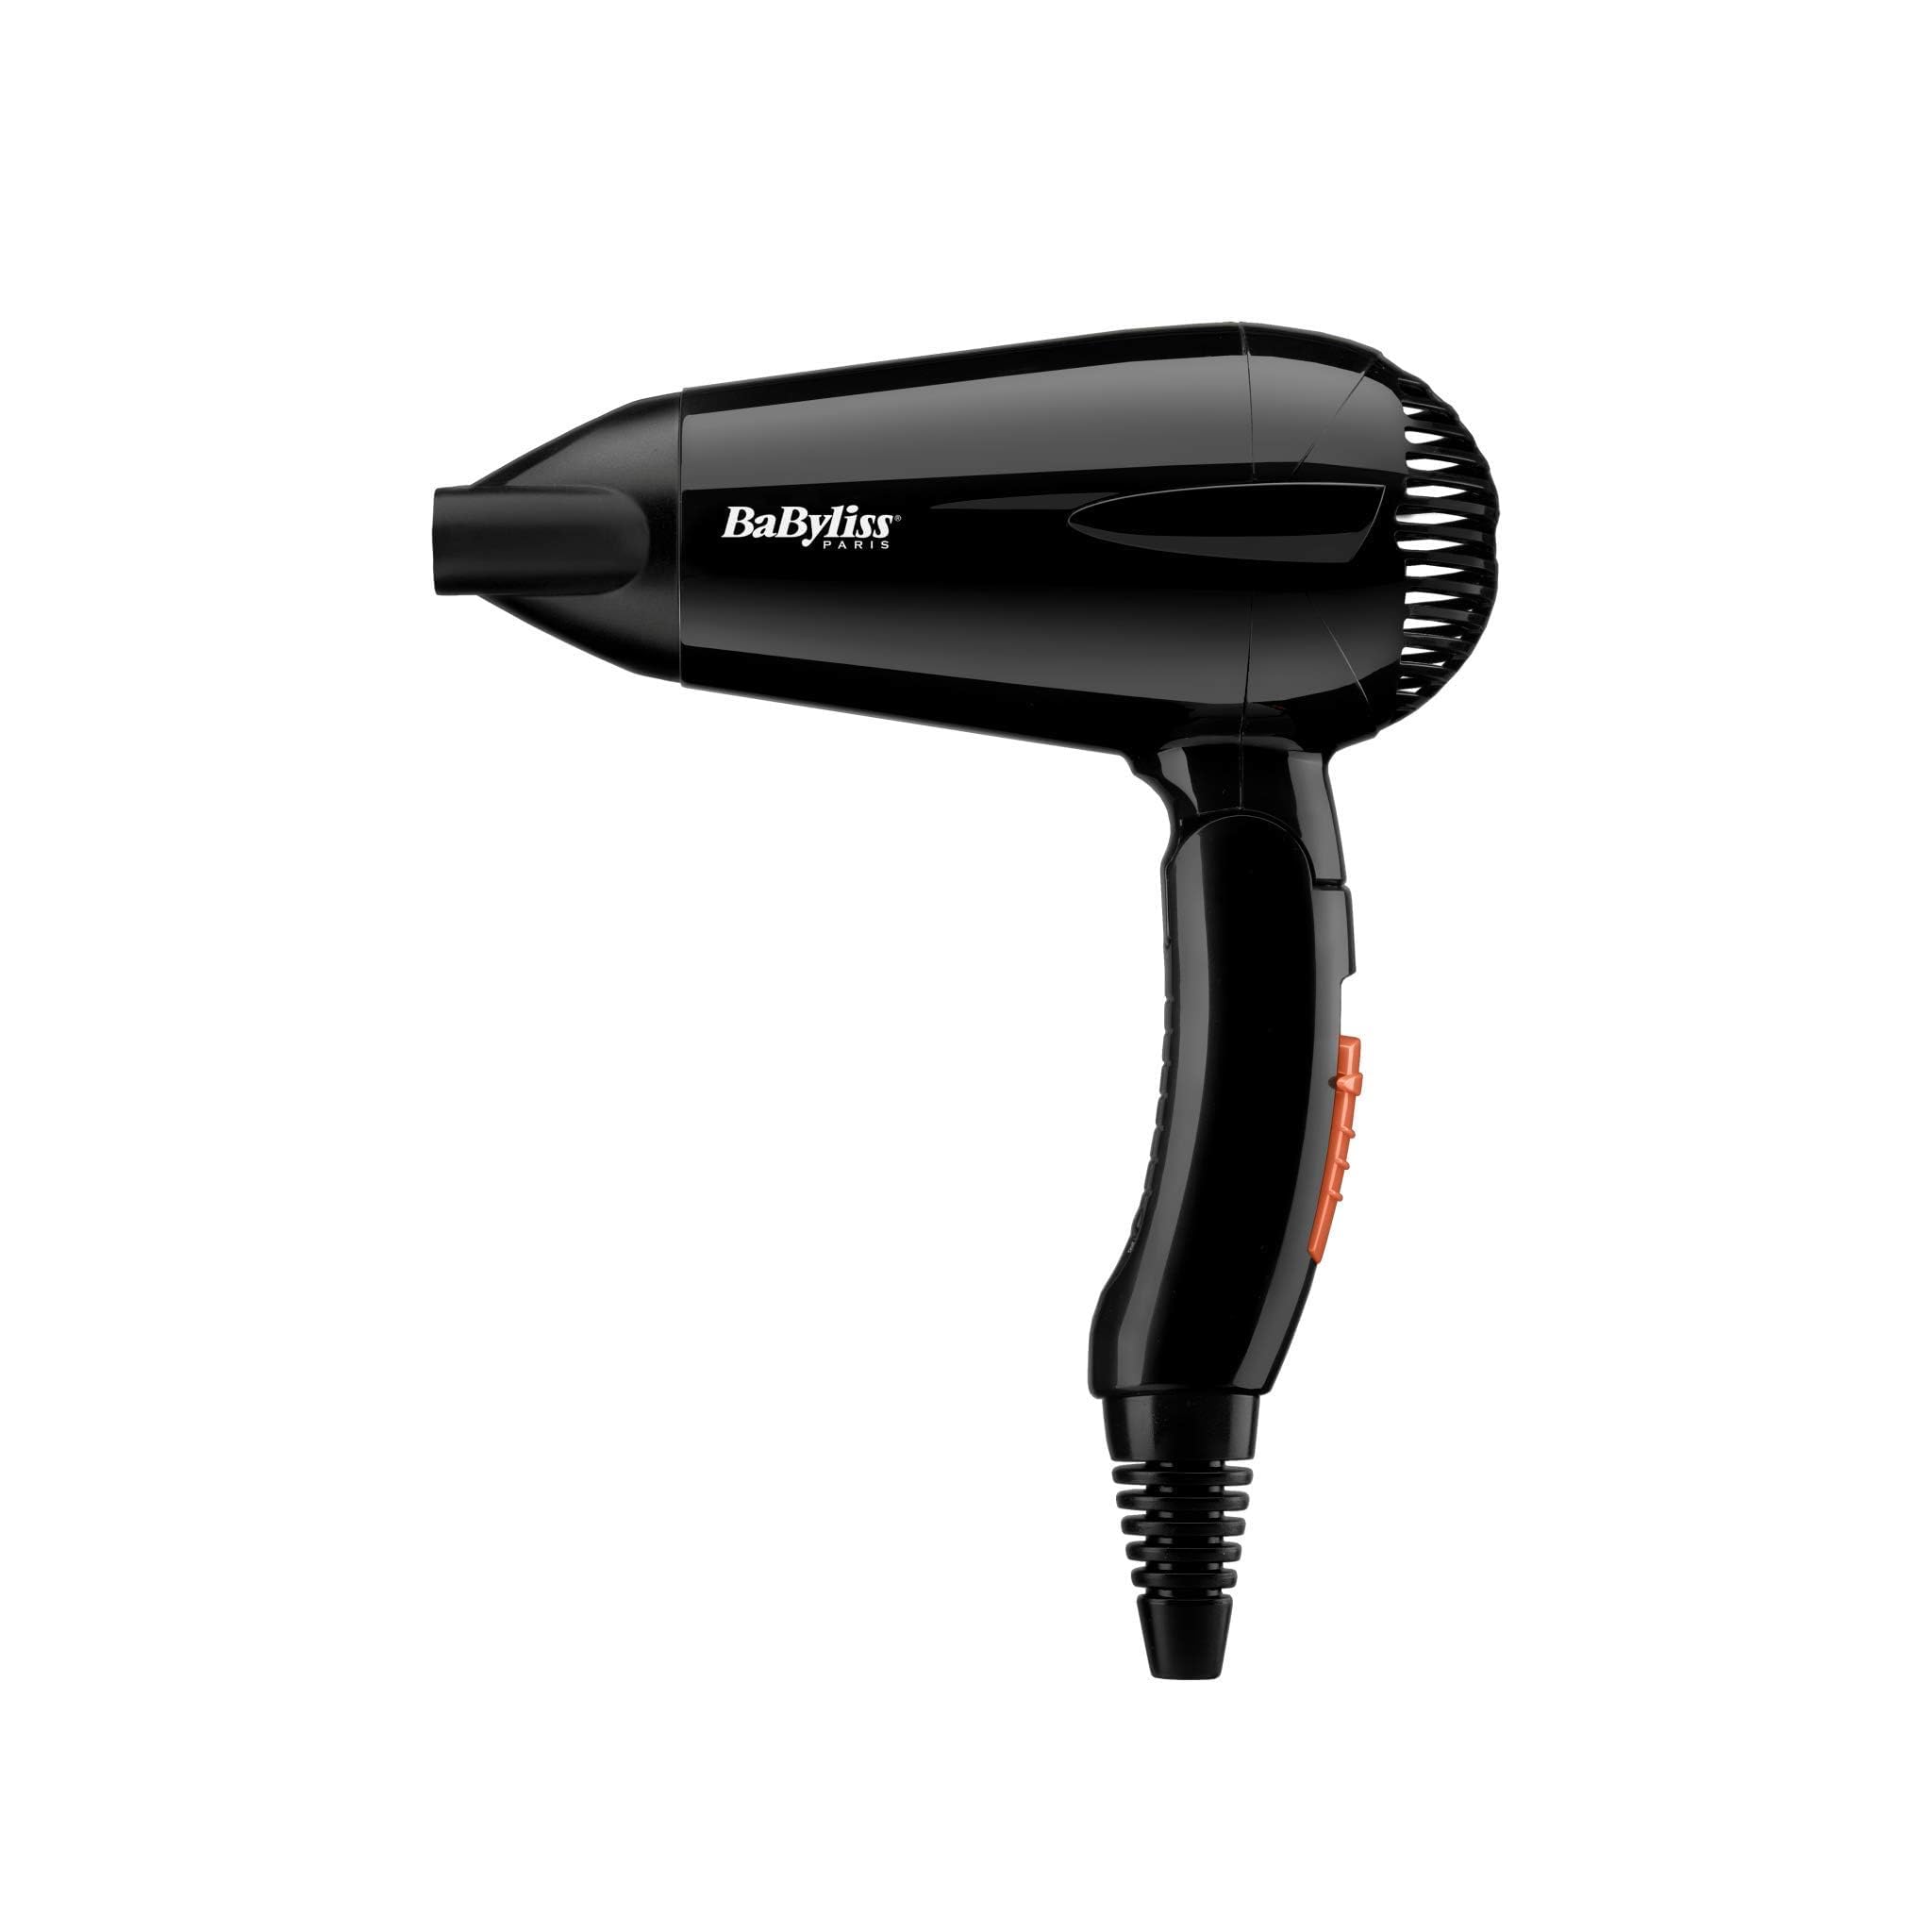 BaByliss Hair Dryer | Powerful 2000w Drying Performance With Dual Voltage For Travel Convenience | 2 Heat And Speed Settings With Fast Drying Time| Lightweight And Portable Design